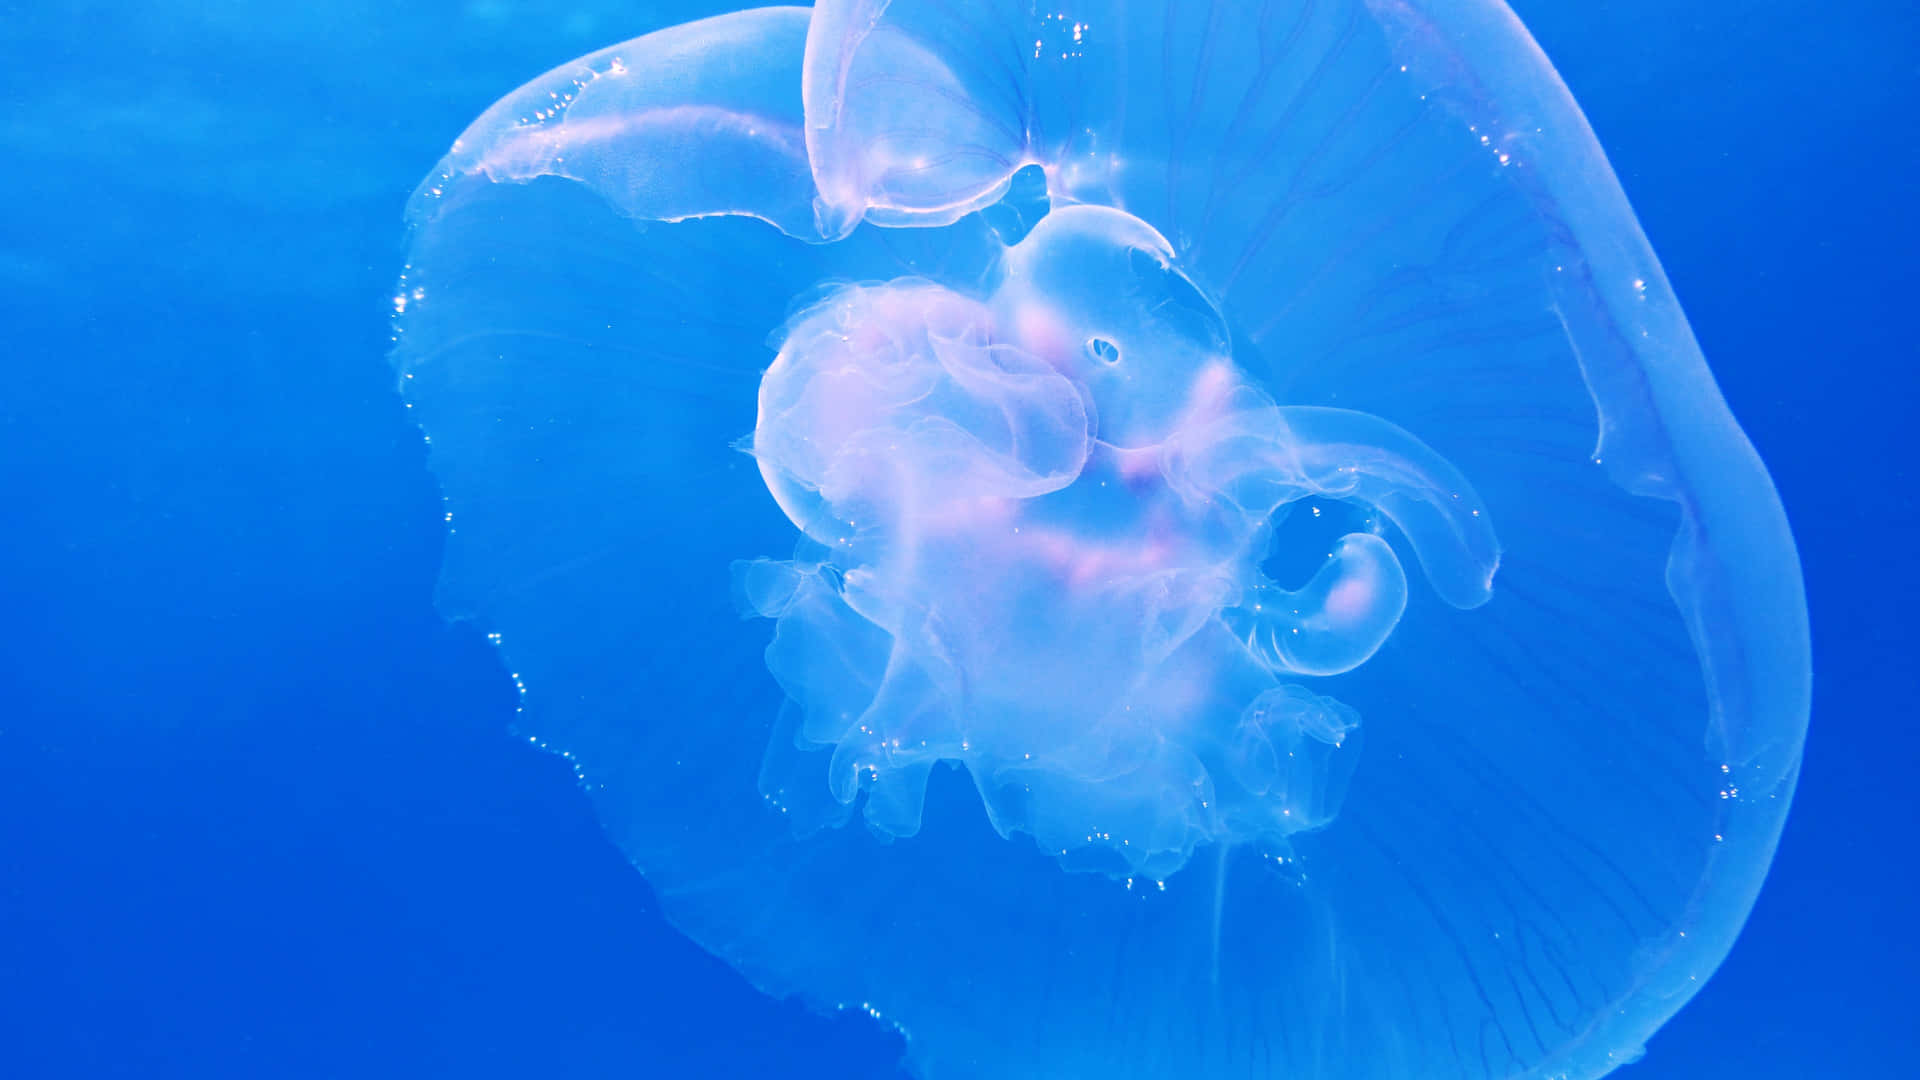 A Vibrant Jellyfish Glows In The Depths Of The Ocean.